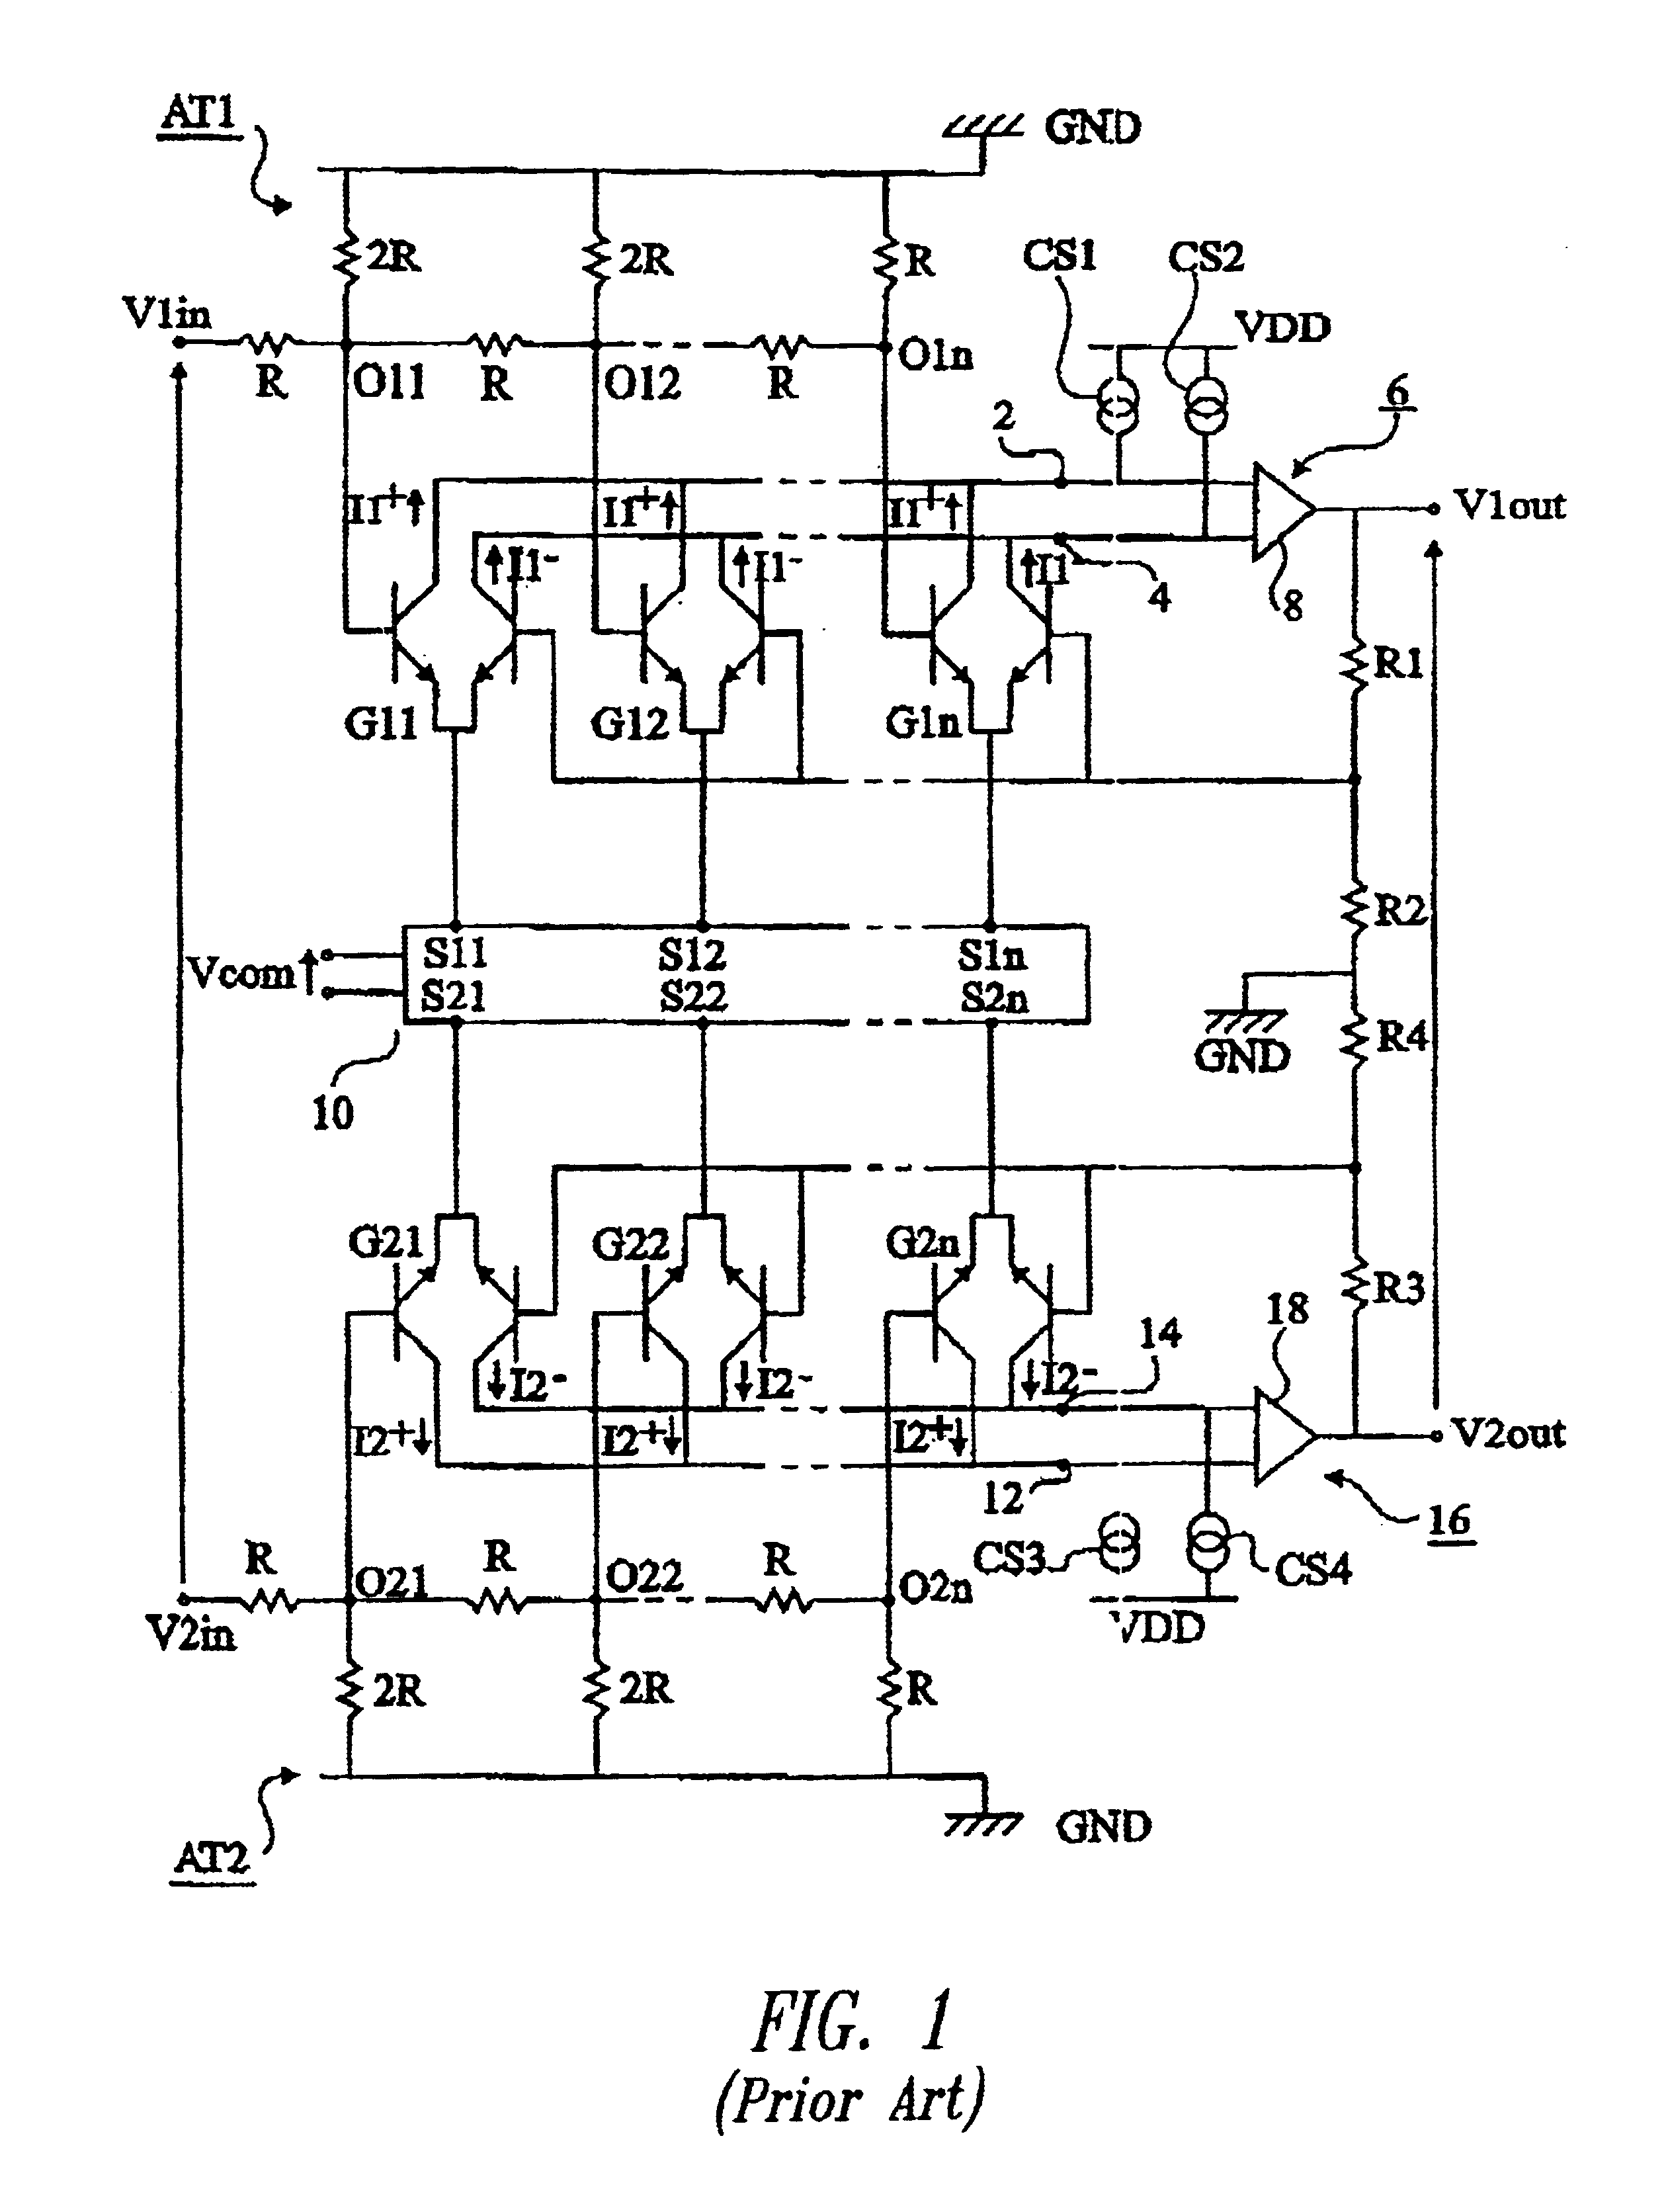 Variable-gain differential input and output amplifier